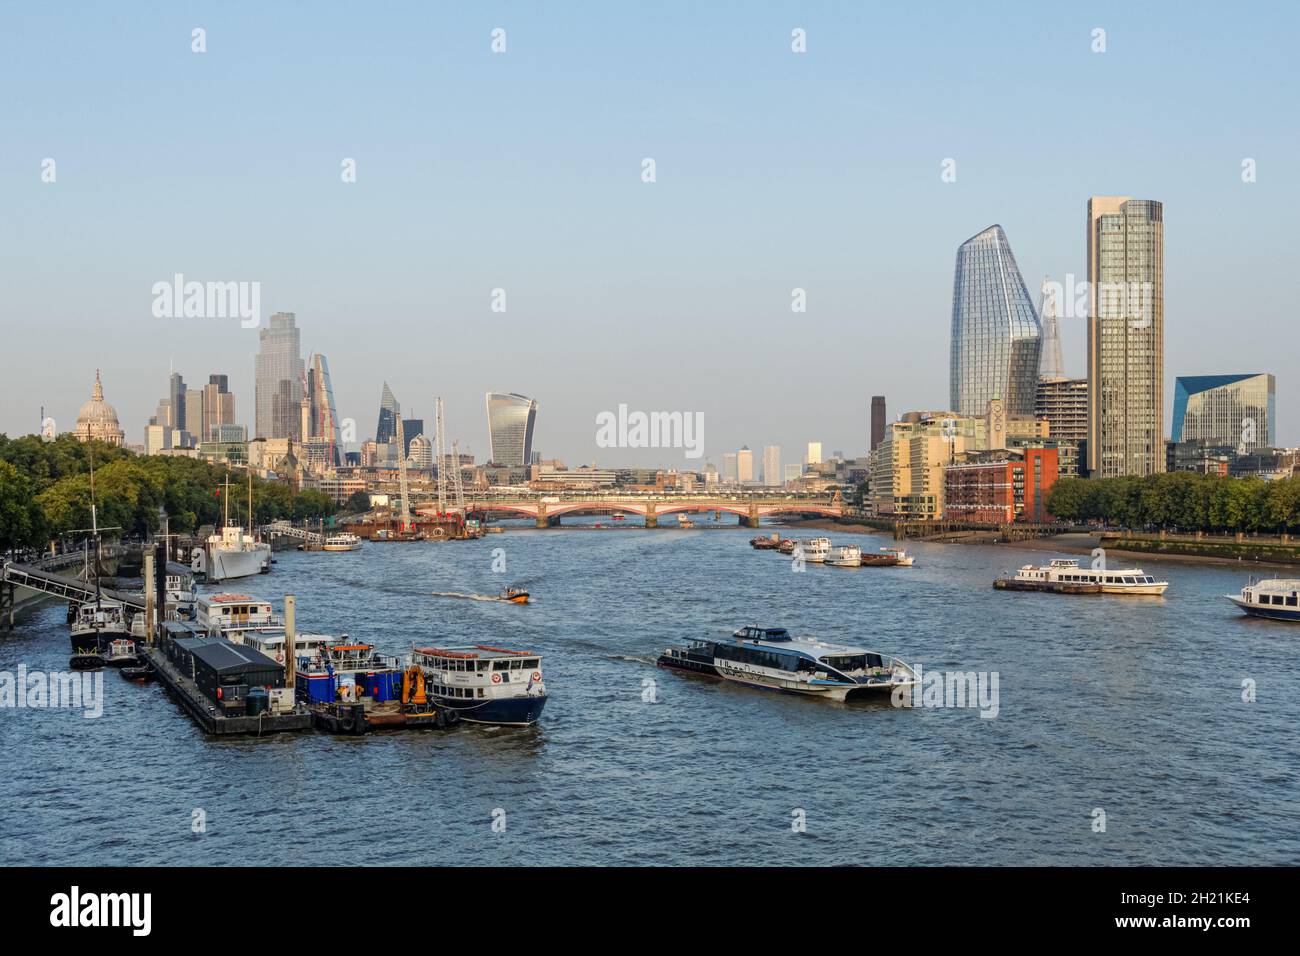 Skyline of the City of London with the River Thames, England United Kingdom UK Stock Photo